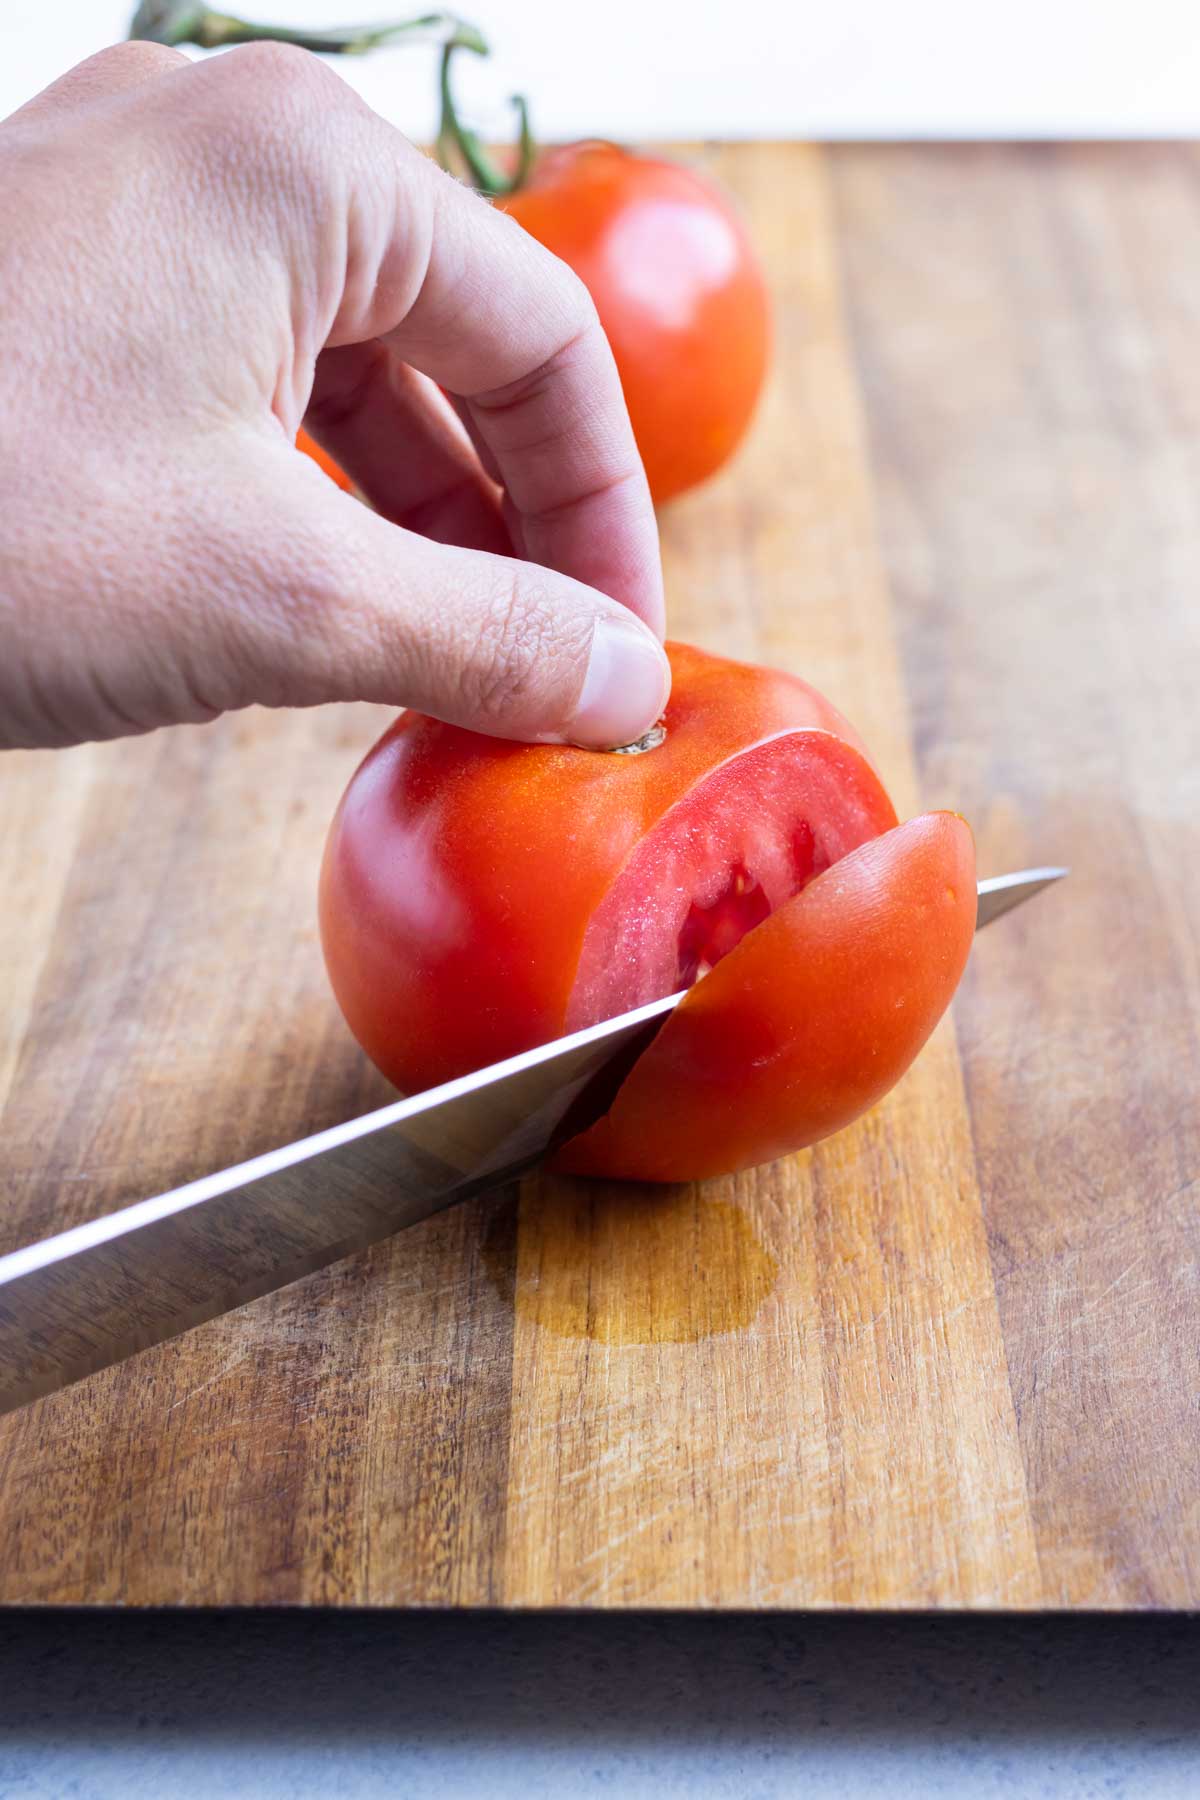 A wedge is cut away from the tomato core.